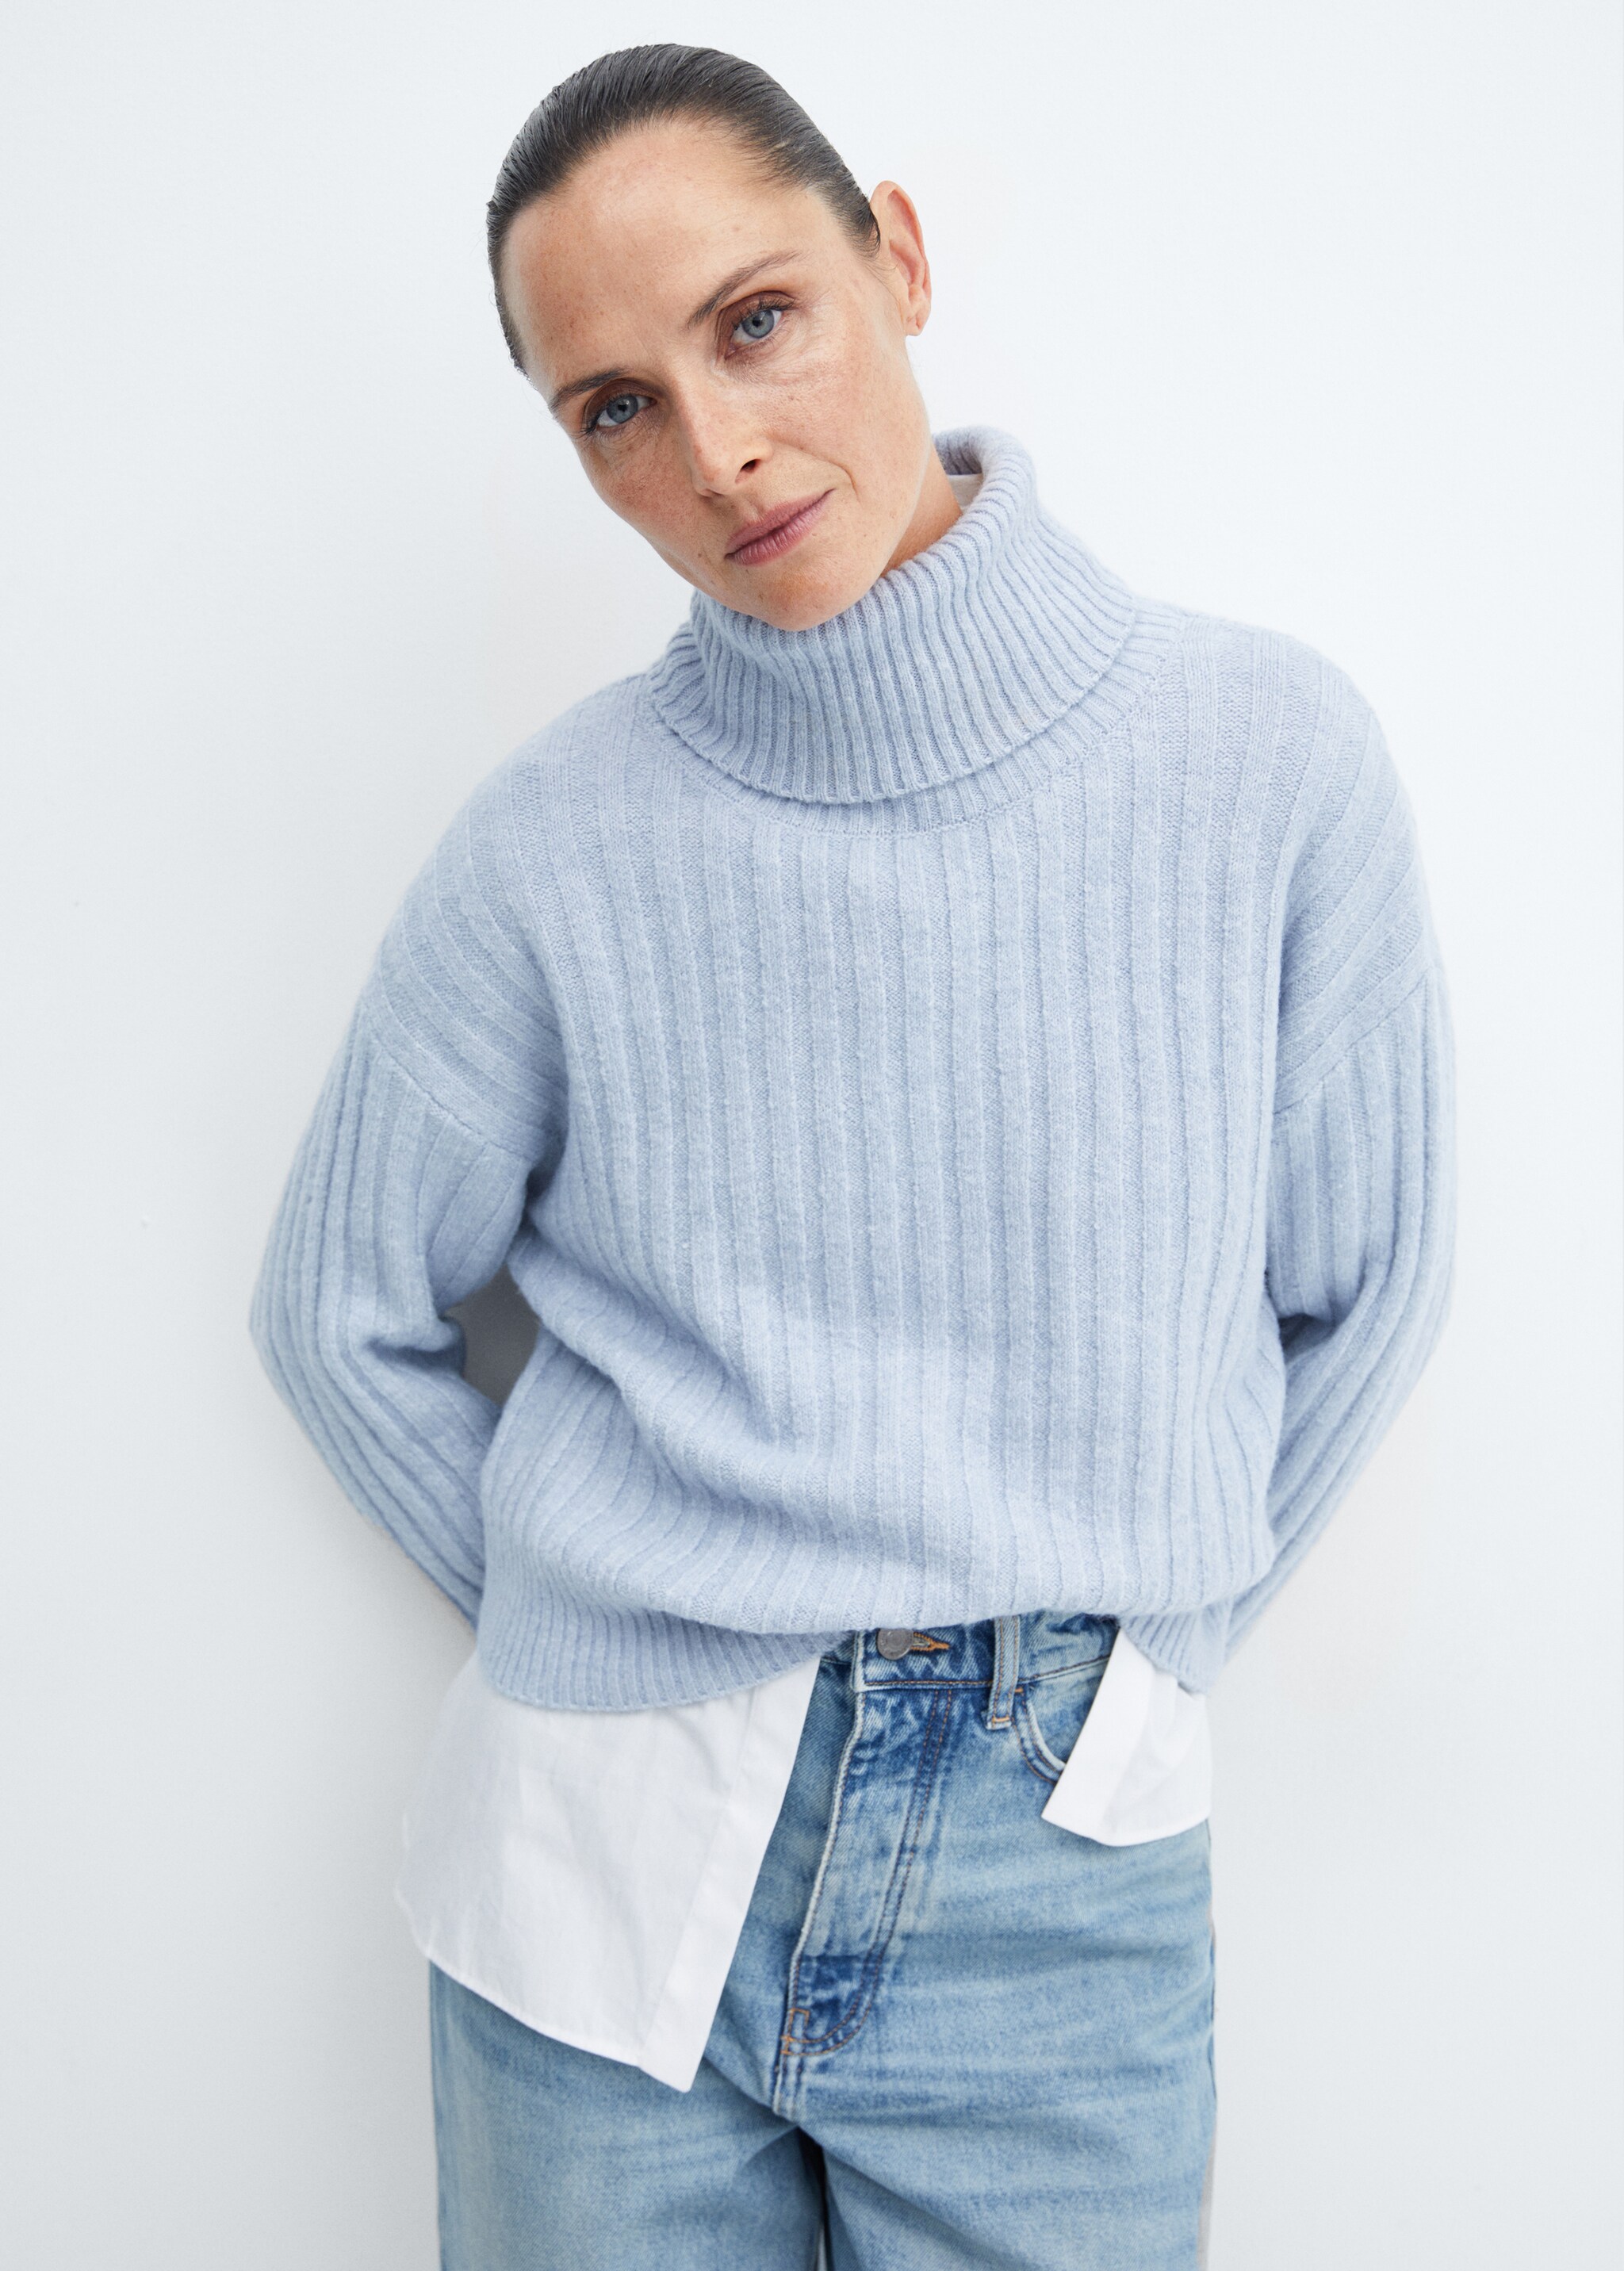 Rolled neck cable sweater - Medium plane